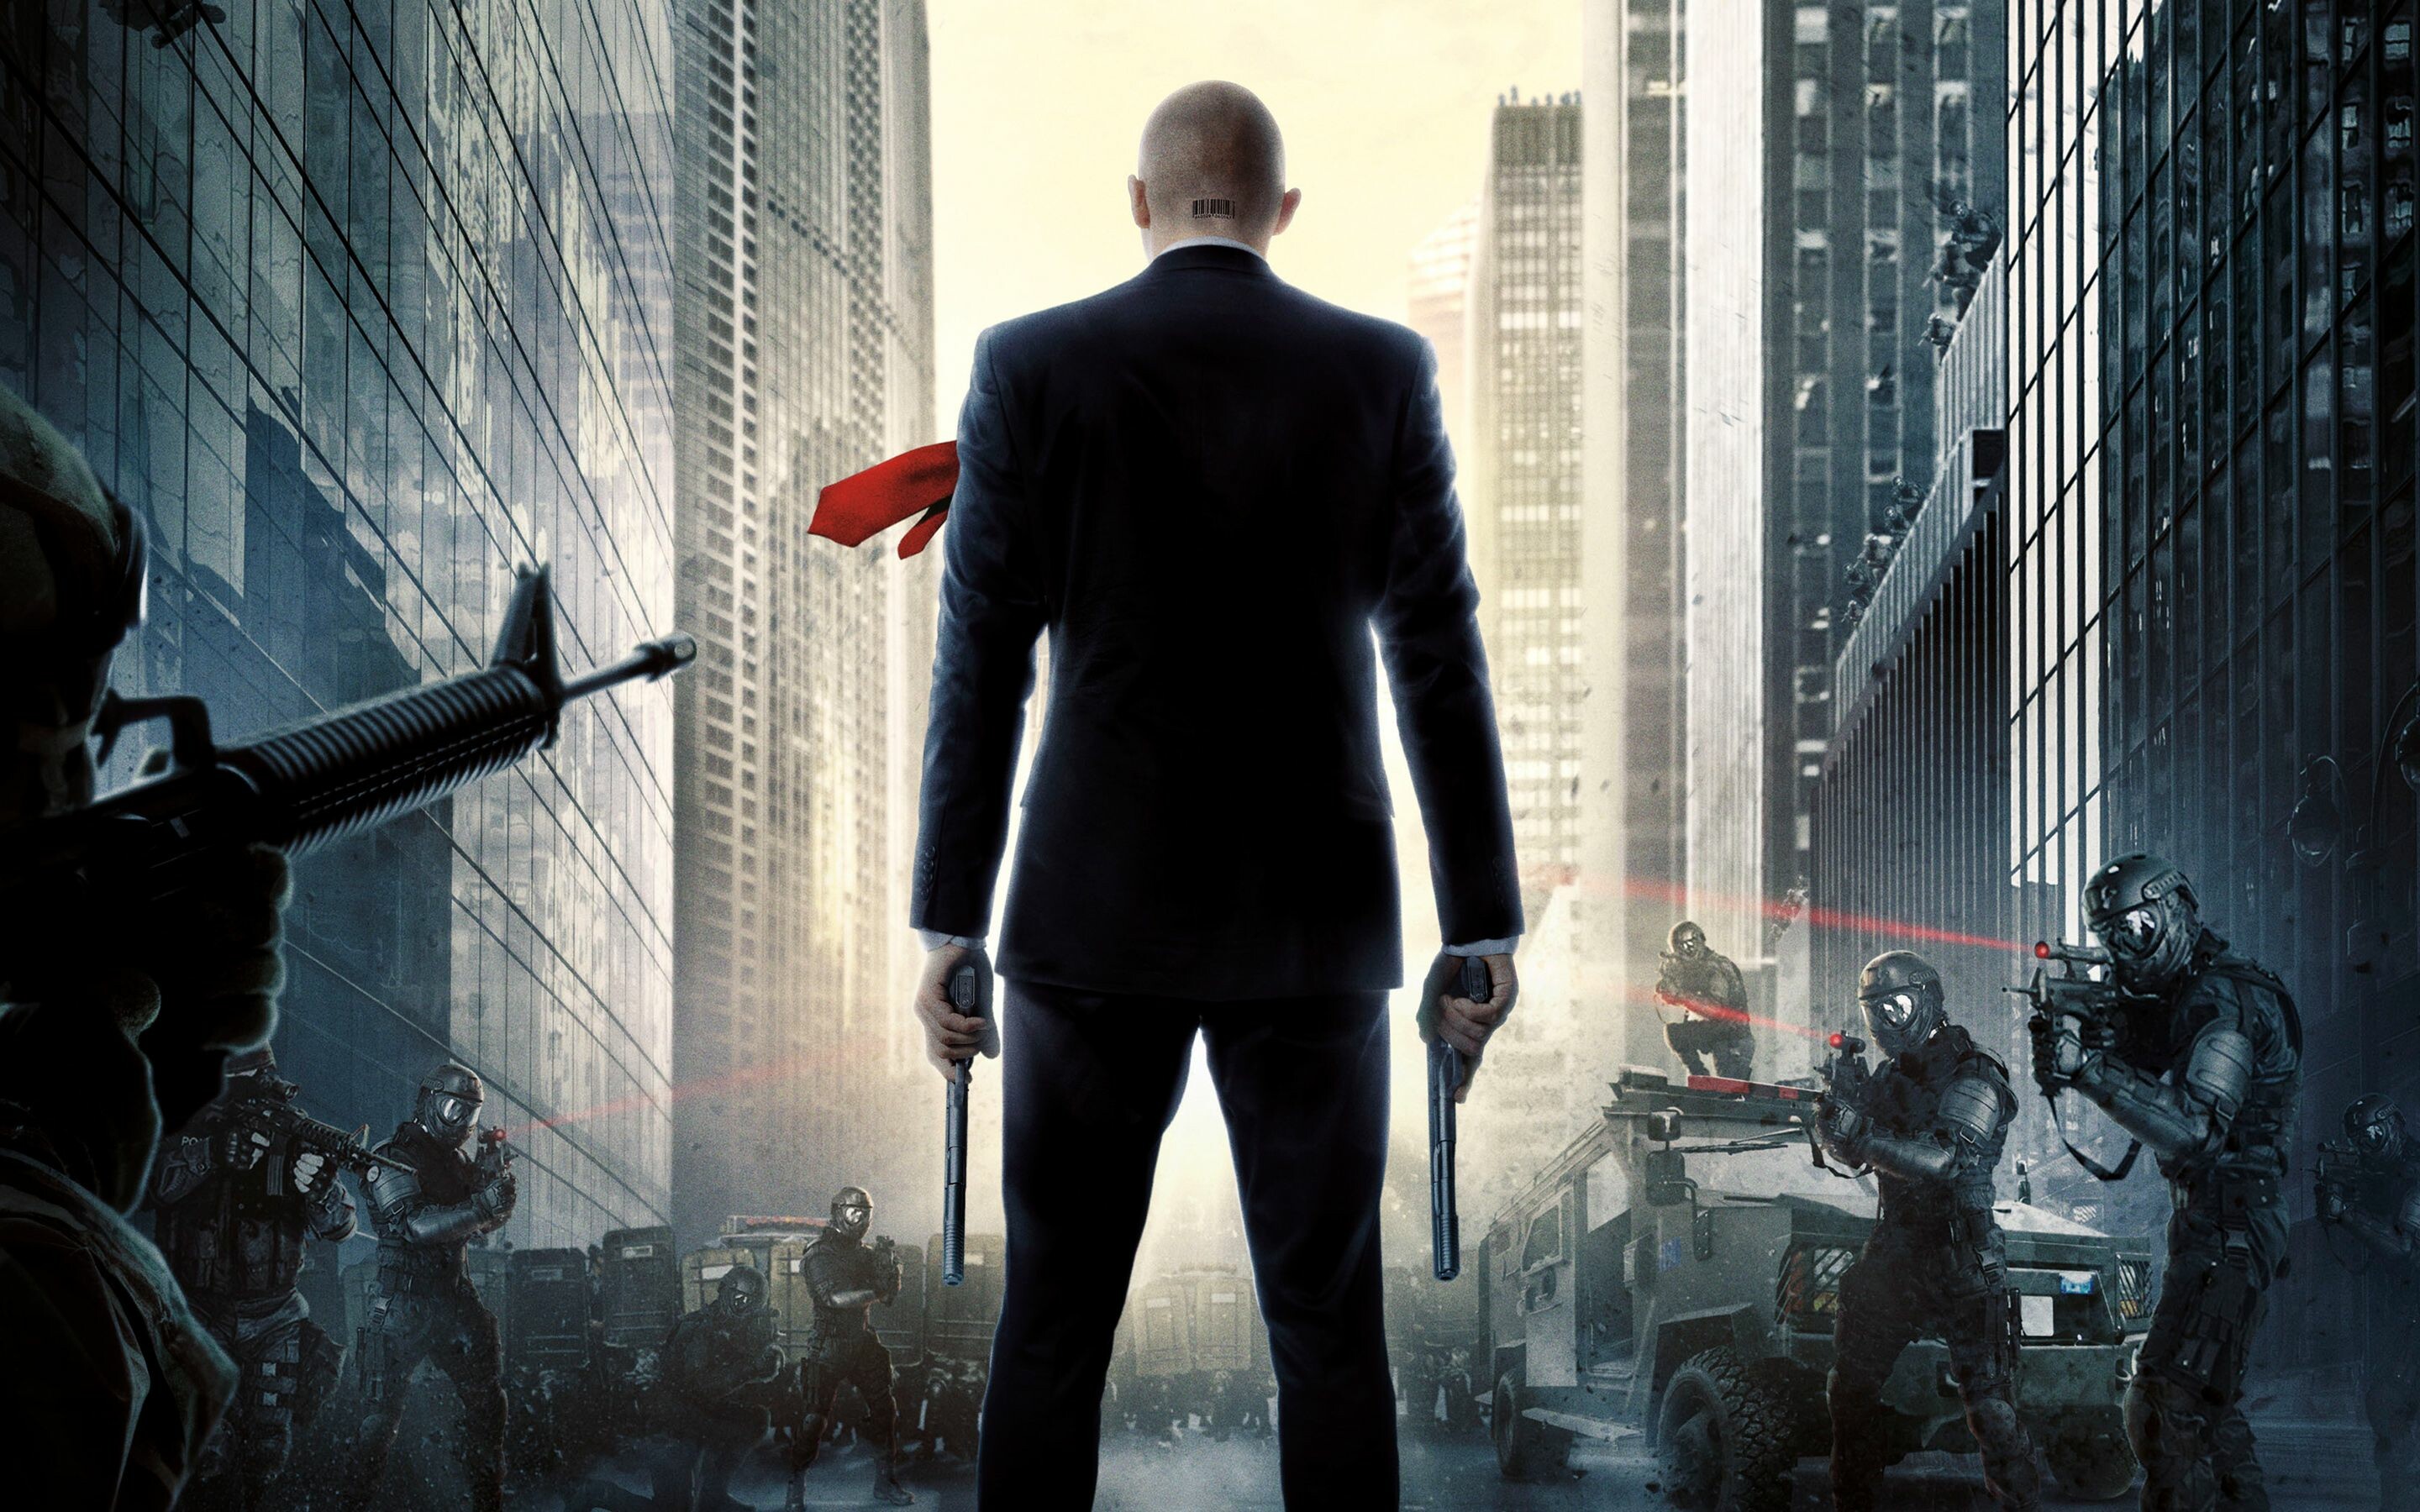 42 Hitman Movie Wallpapers Hd 4k 5k For Pc And Mobile Download Free Images For Iphone Android